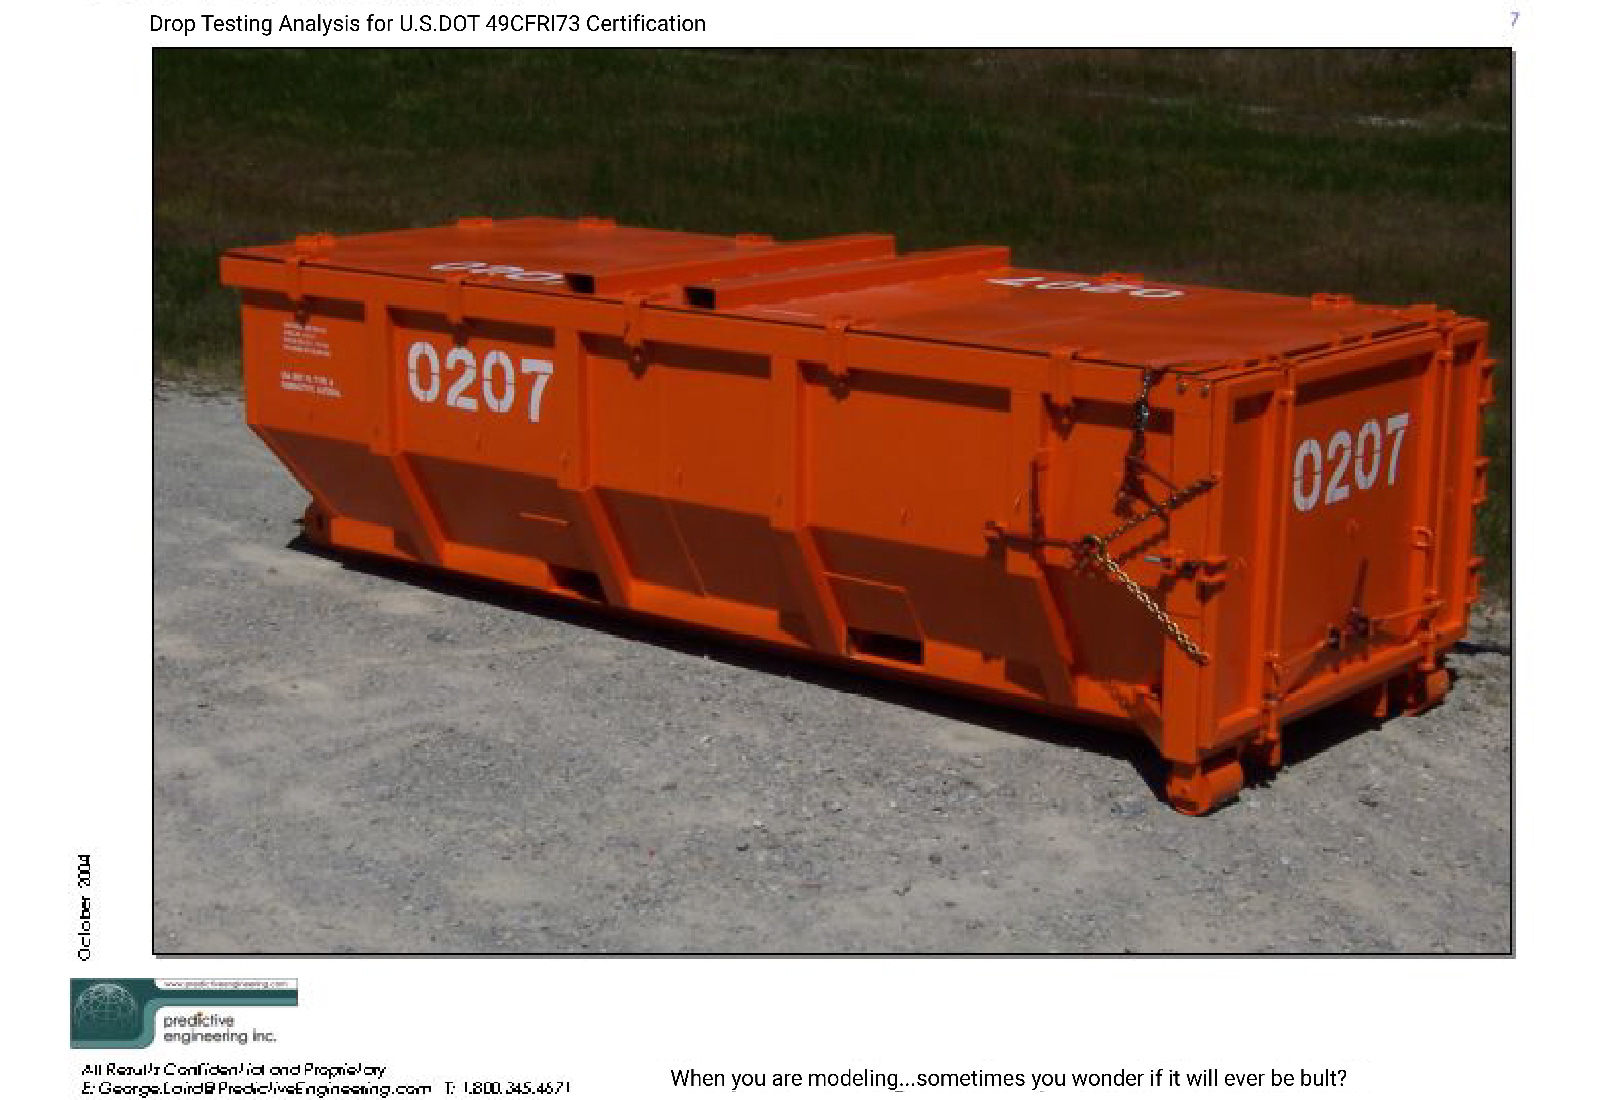 Large Nuclear Waste Storage Containers Slide 5